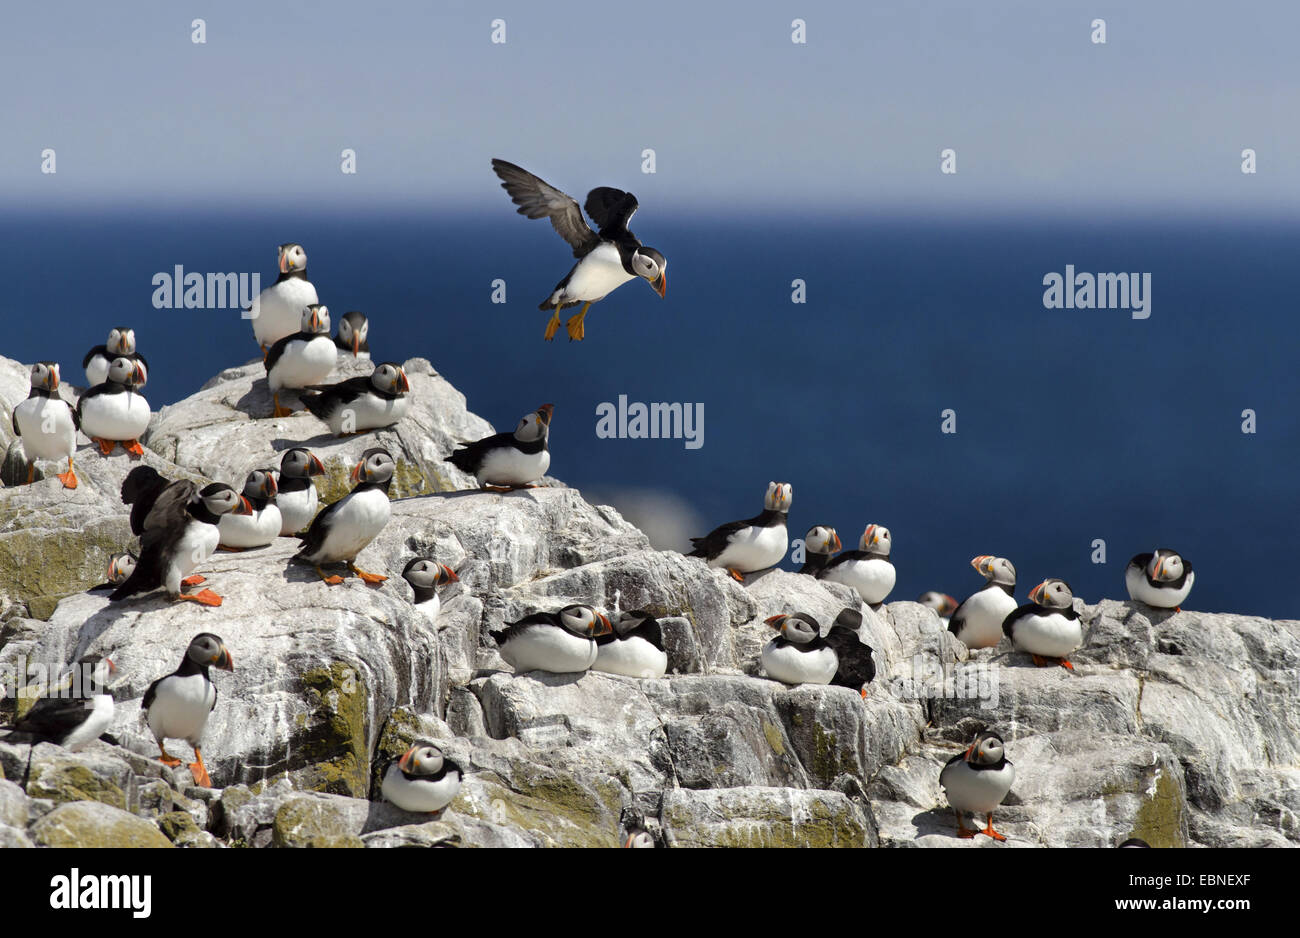 Atlantic puffin, Common puffin (Fratercula arctica), landing in a colony on a cliff, United Kingdom, England, Northumberland, Farne Islands Stock Photo